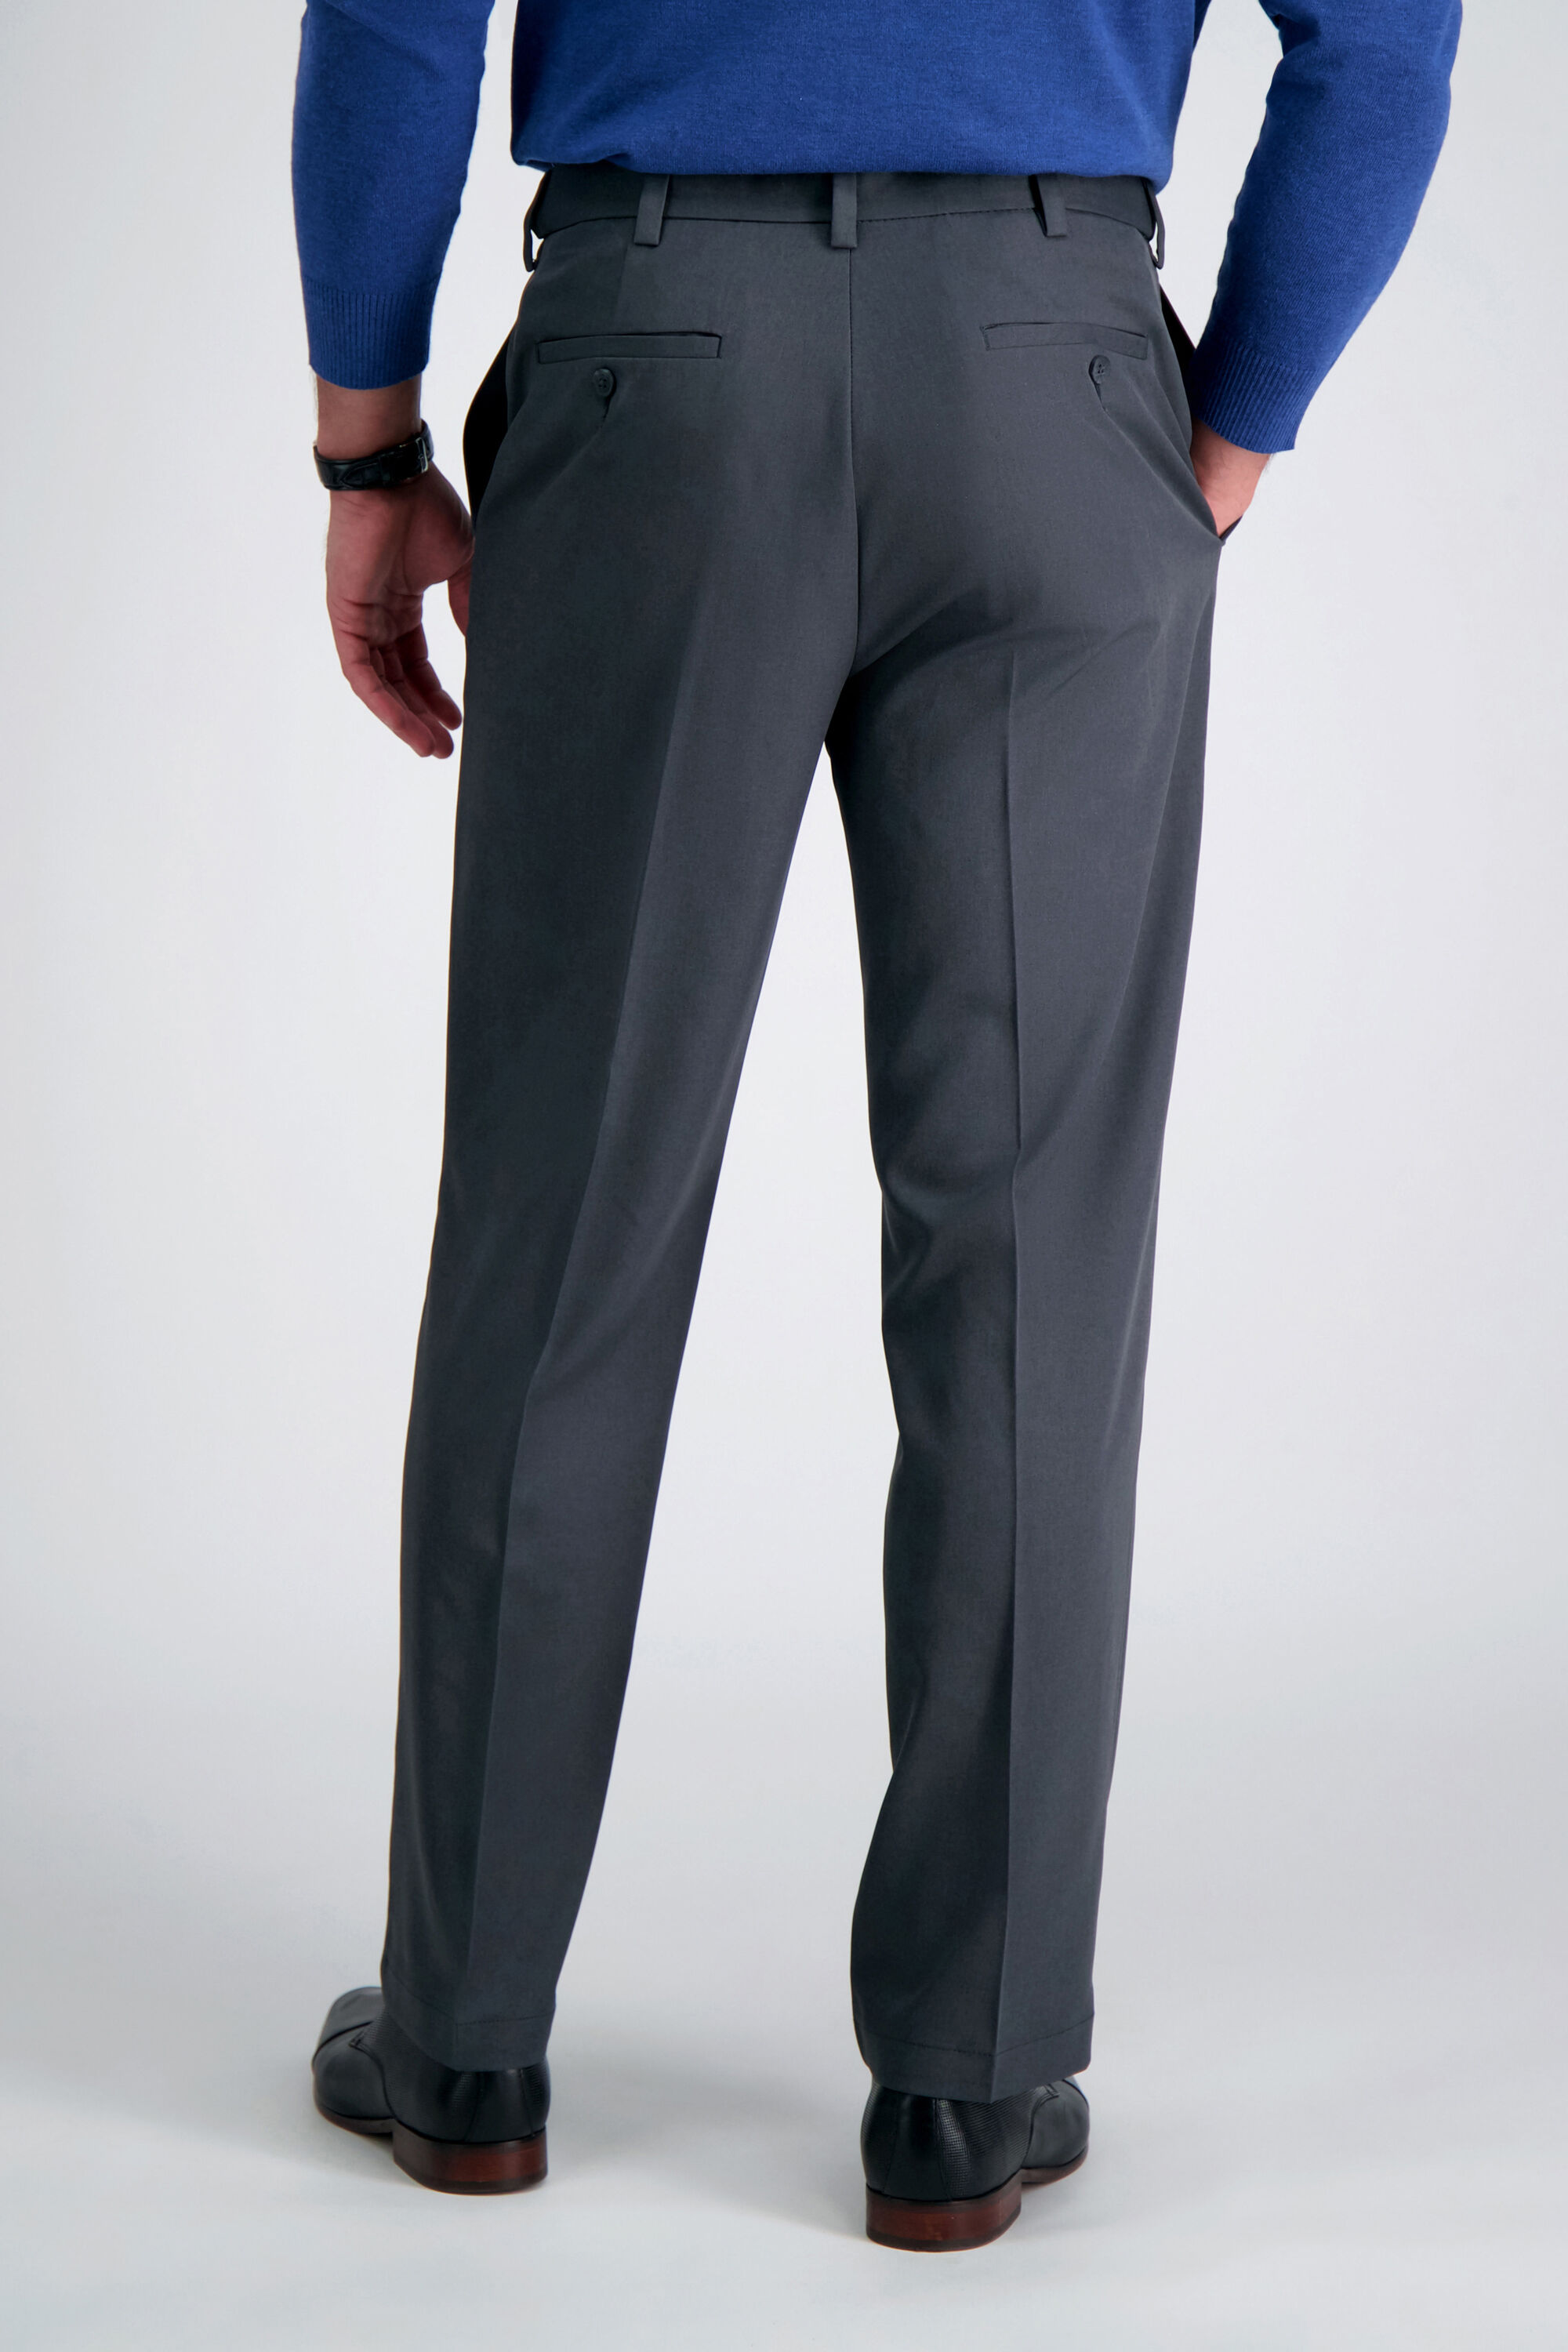 Cool 18 Pro Heather Pant | Classic Fit, Flat Front, Stretch, No Iron ...